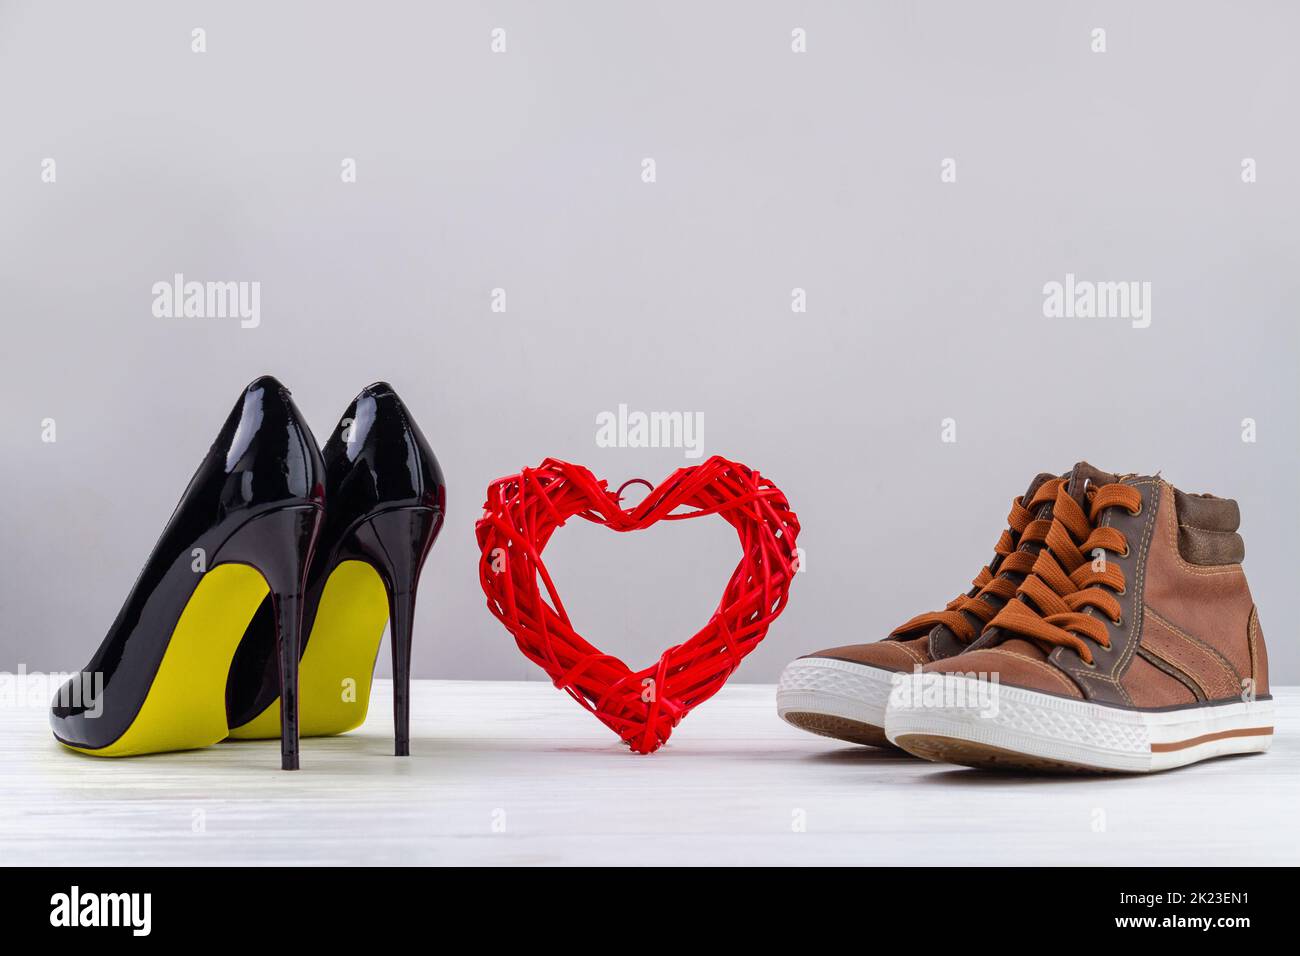 Red knitted heart with black womens high heel shoes and mens sneakers. Footwear on white background with copy space. Stock Photo